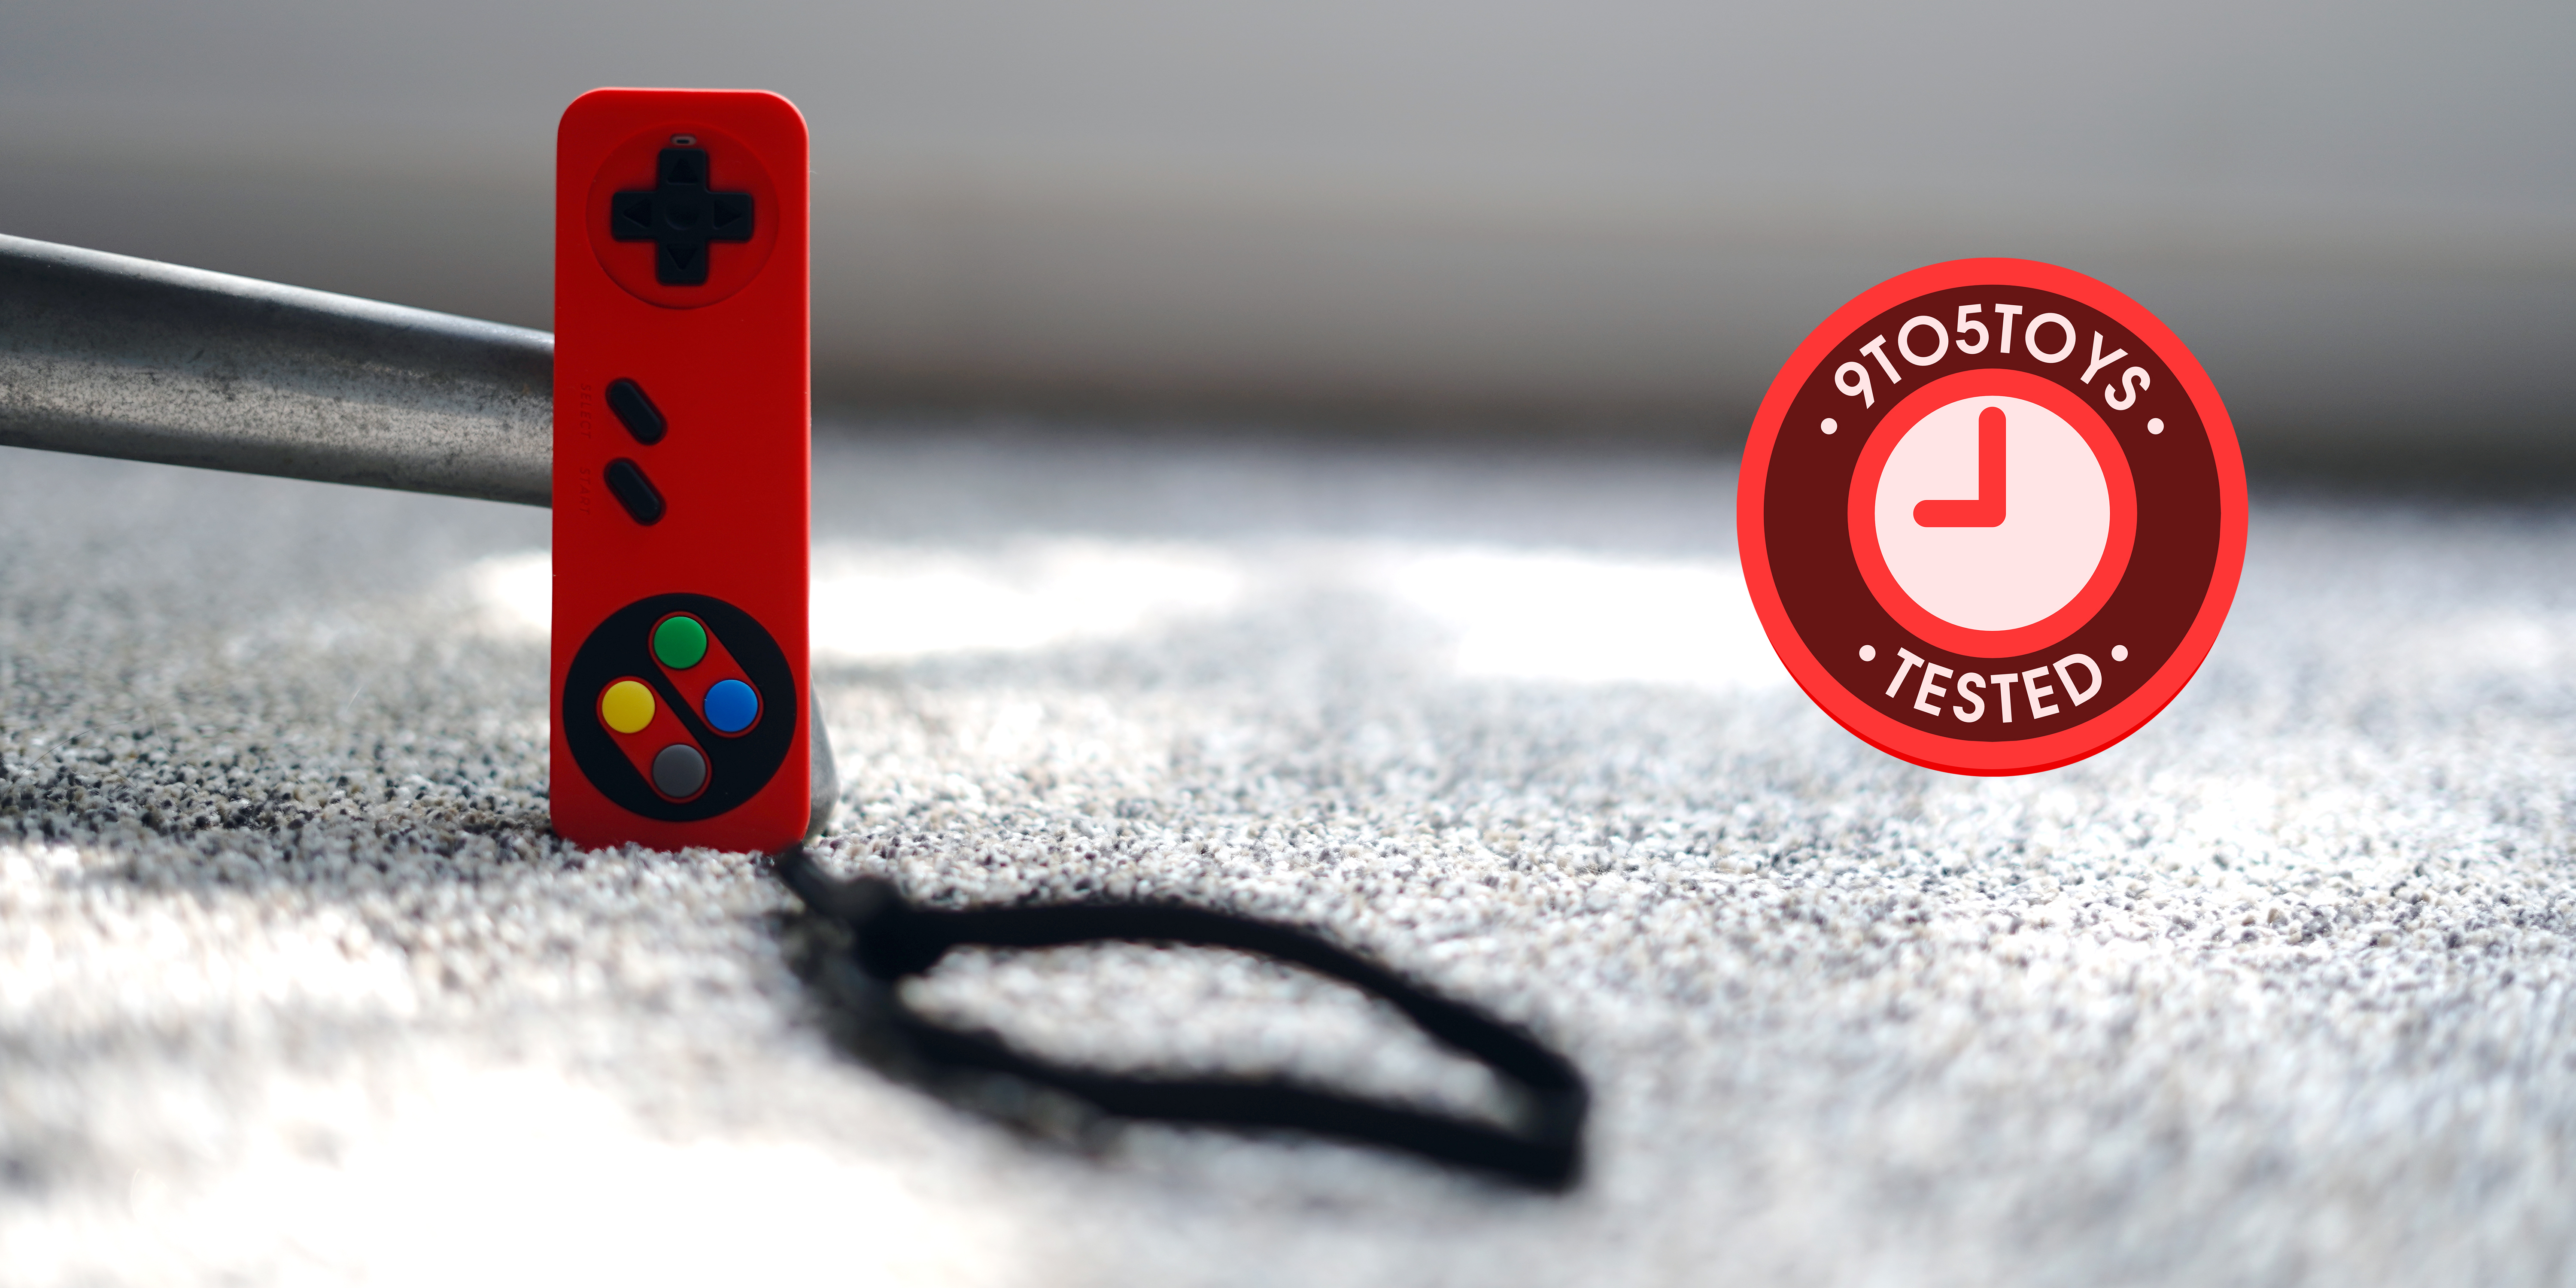 elago R4 case review: Nintendo styling for Apple TV - 9to5Toys